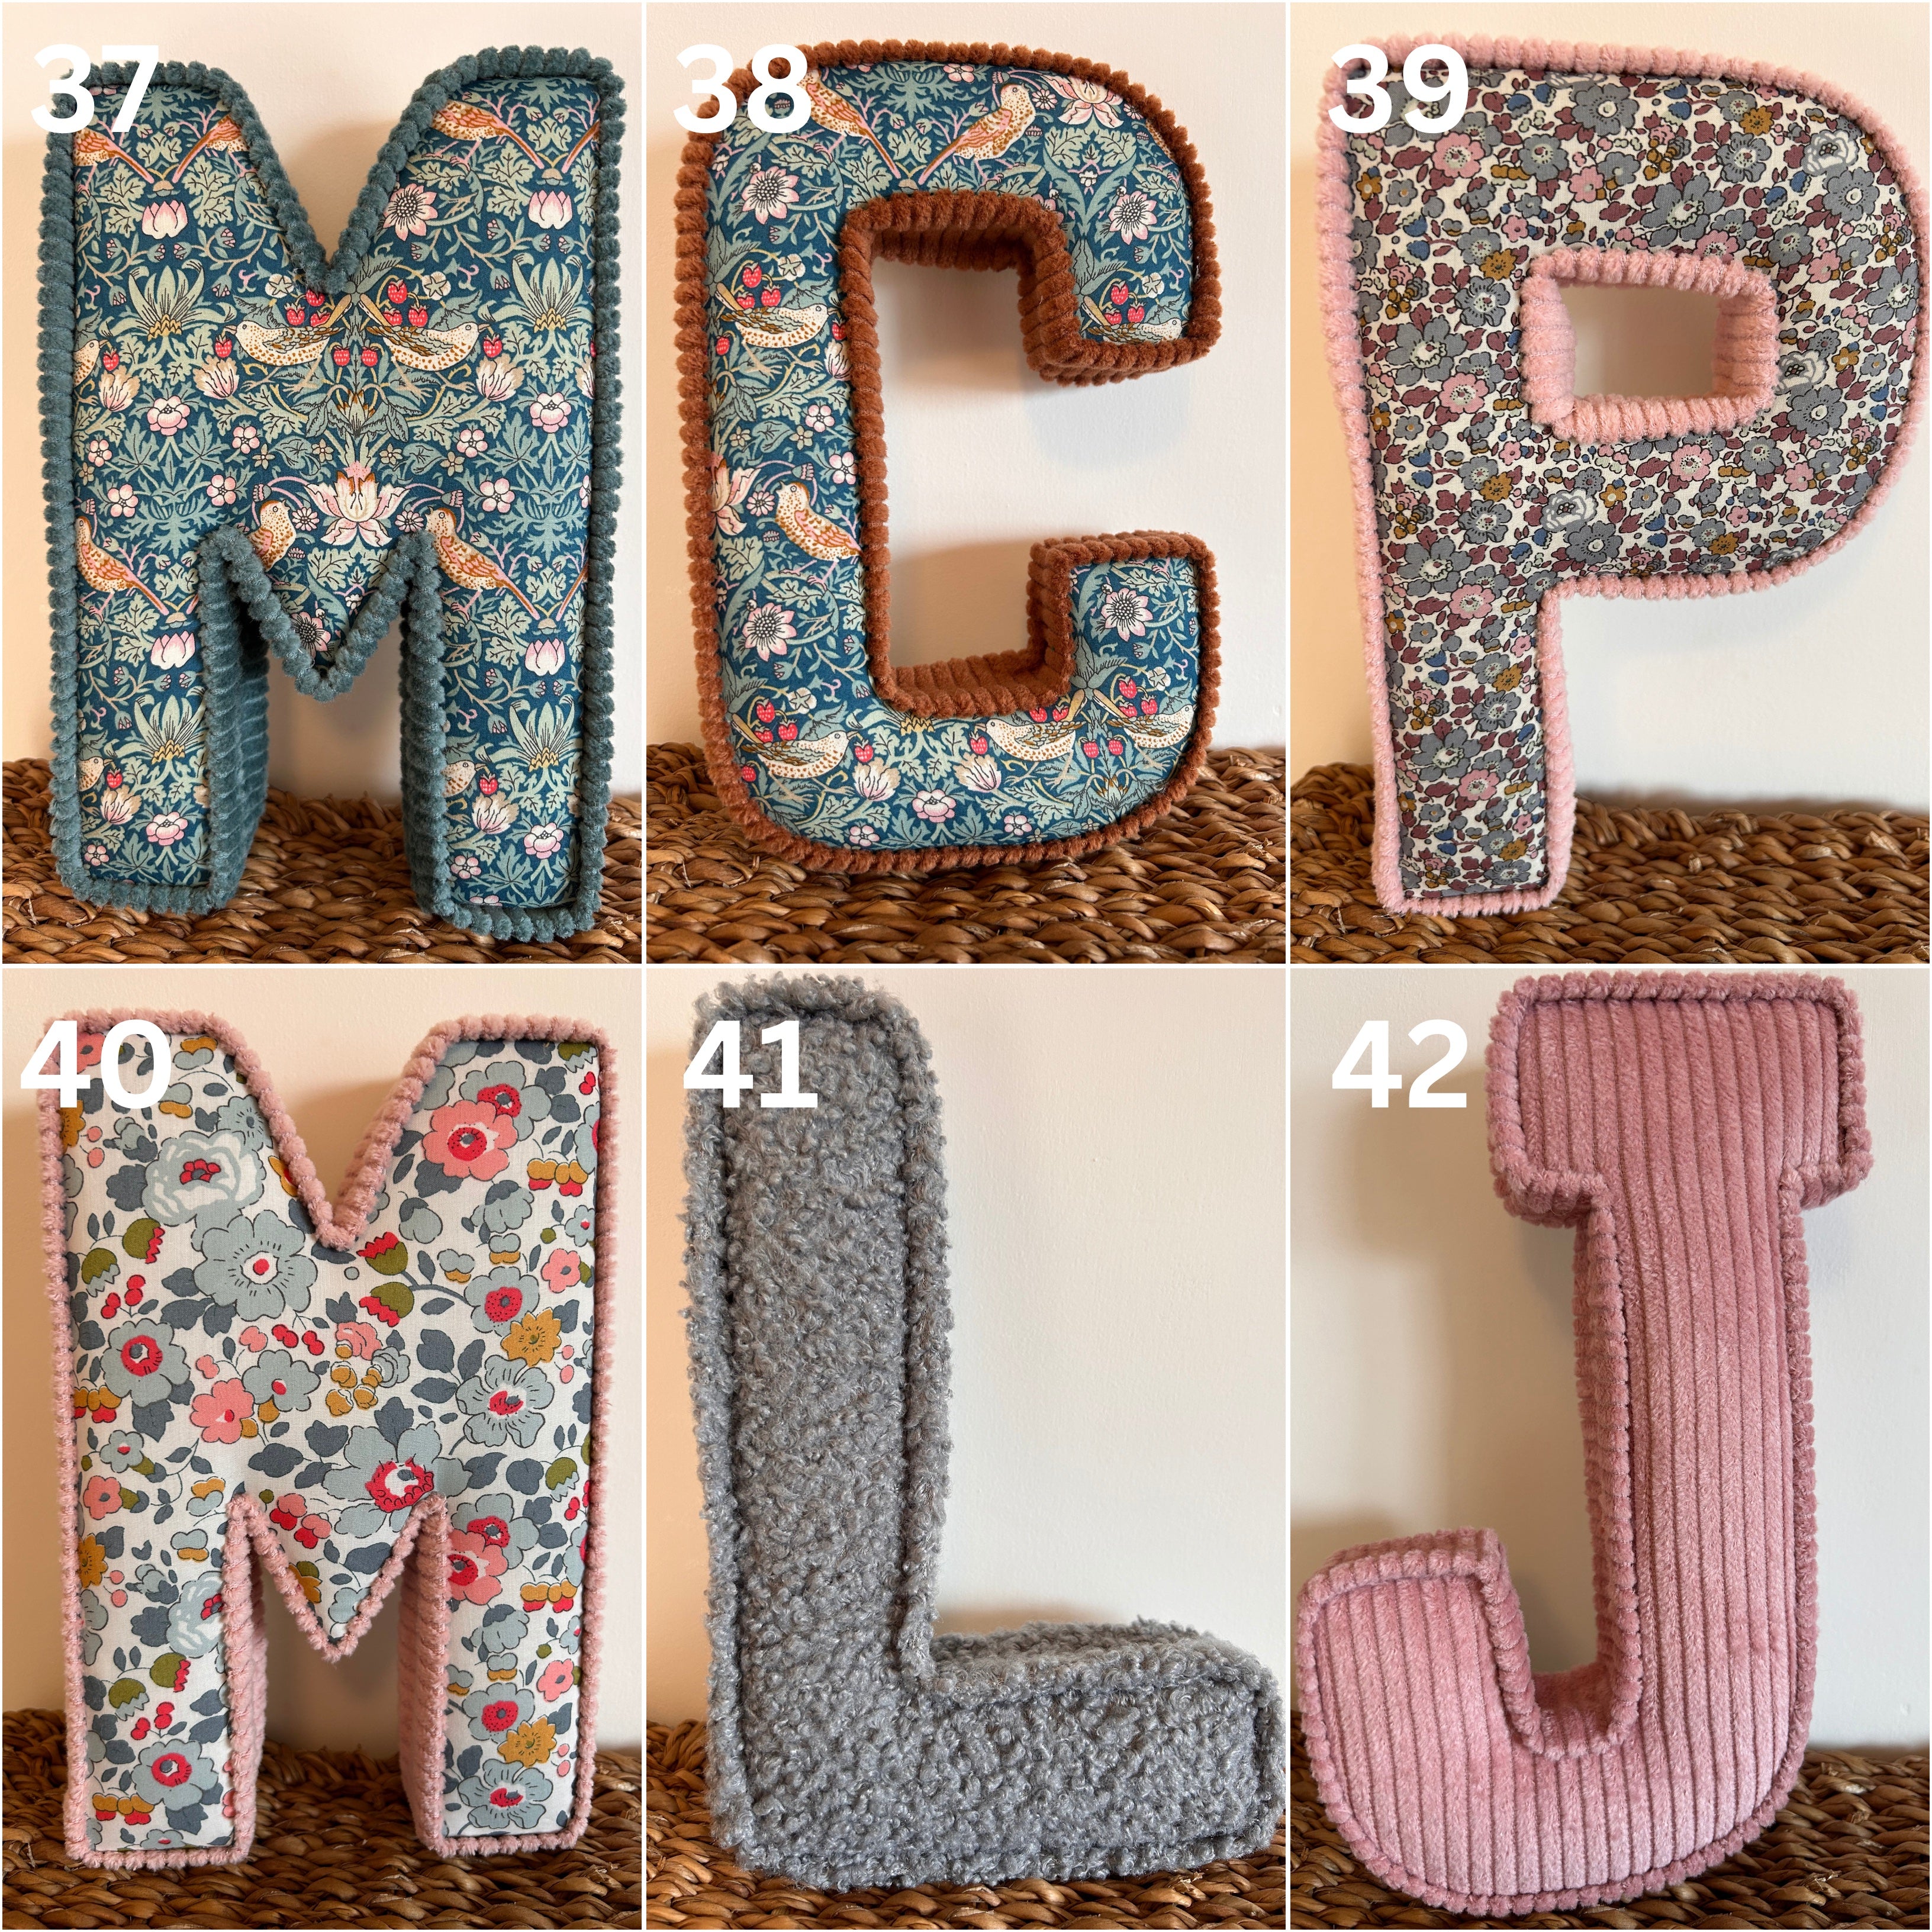 READY MADE LETTERS